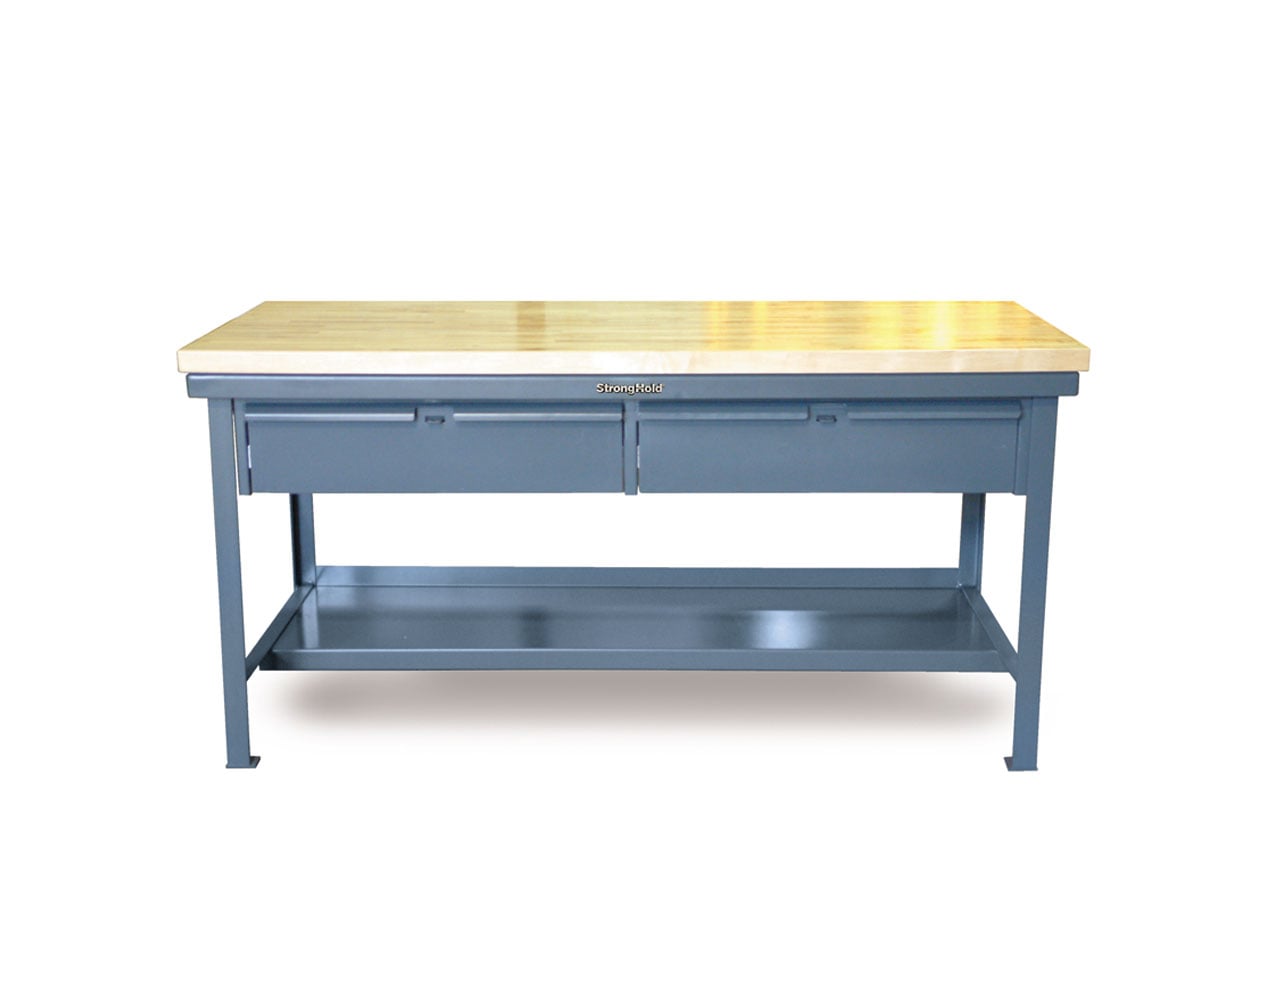 Extreme Duty 7 GA Shop Table with 1 3/4 in. Maple Top, 2 Drawers, 1 Shelf - 60 In. W x 36 In. D x 34 In. H